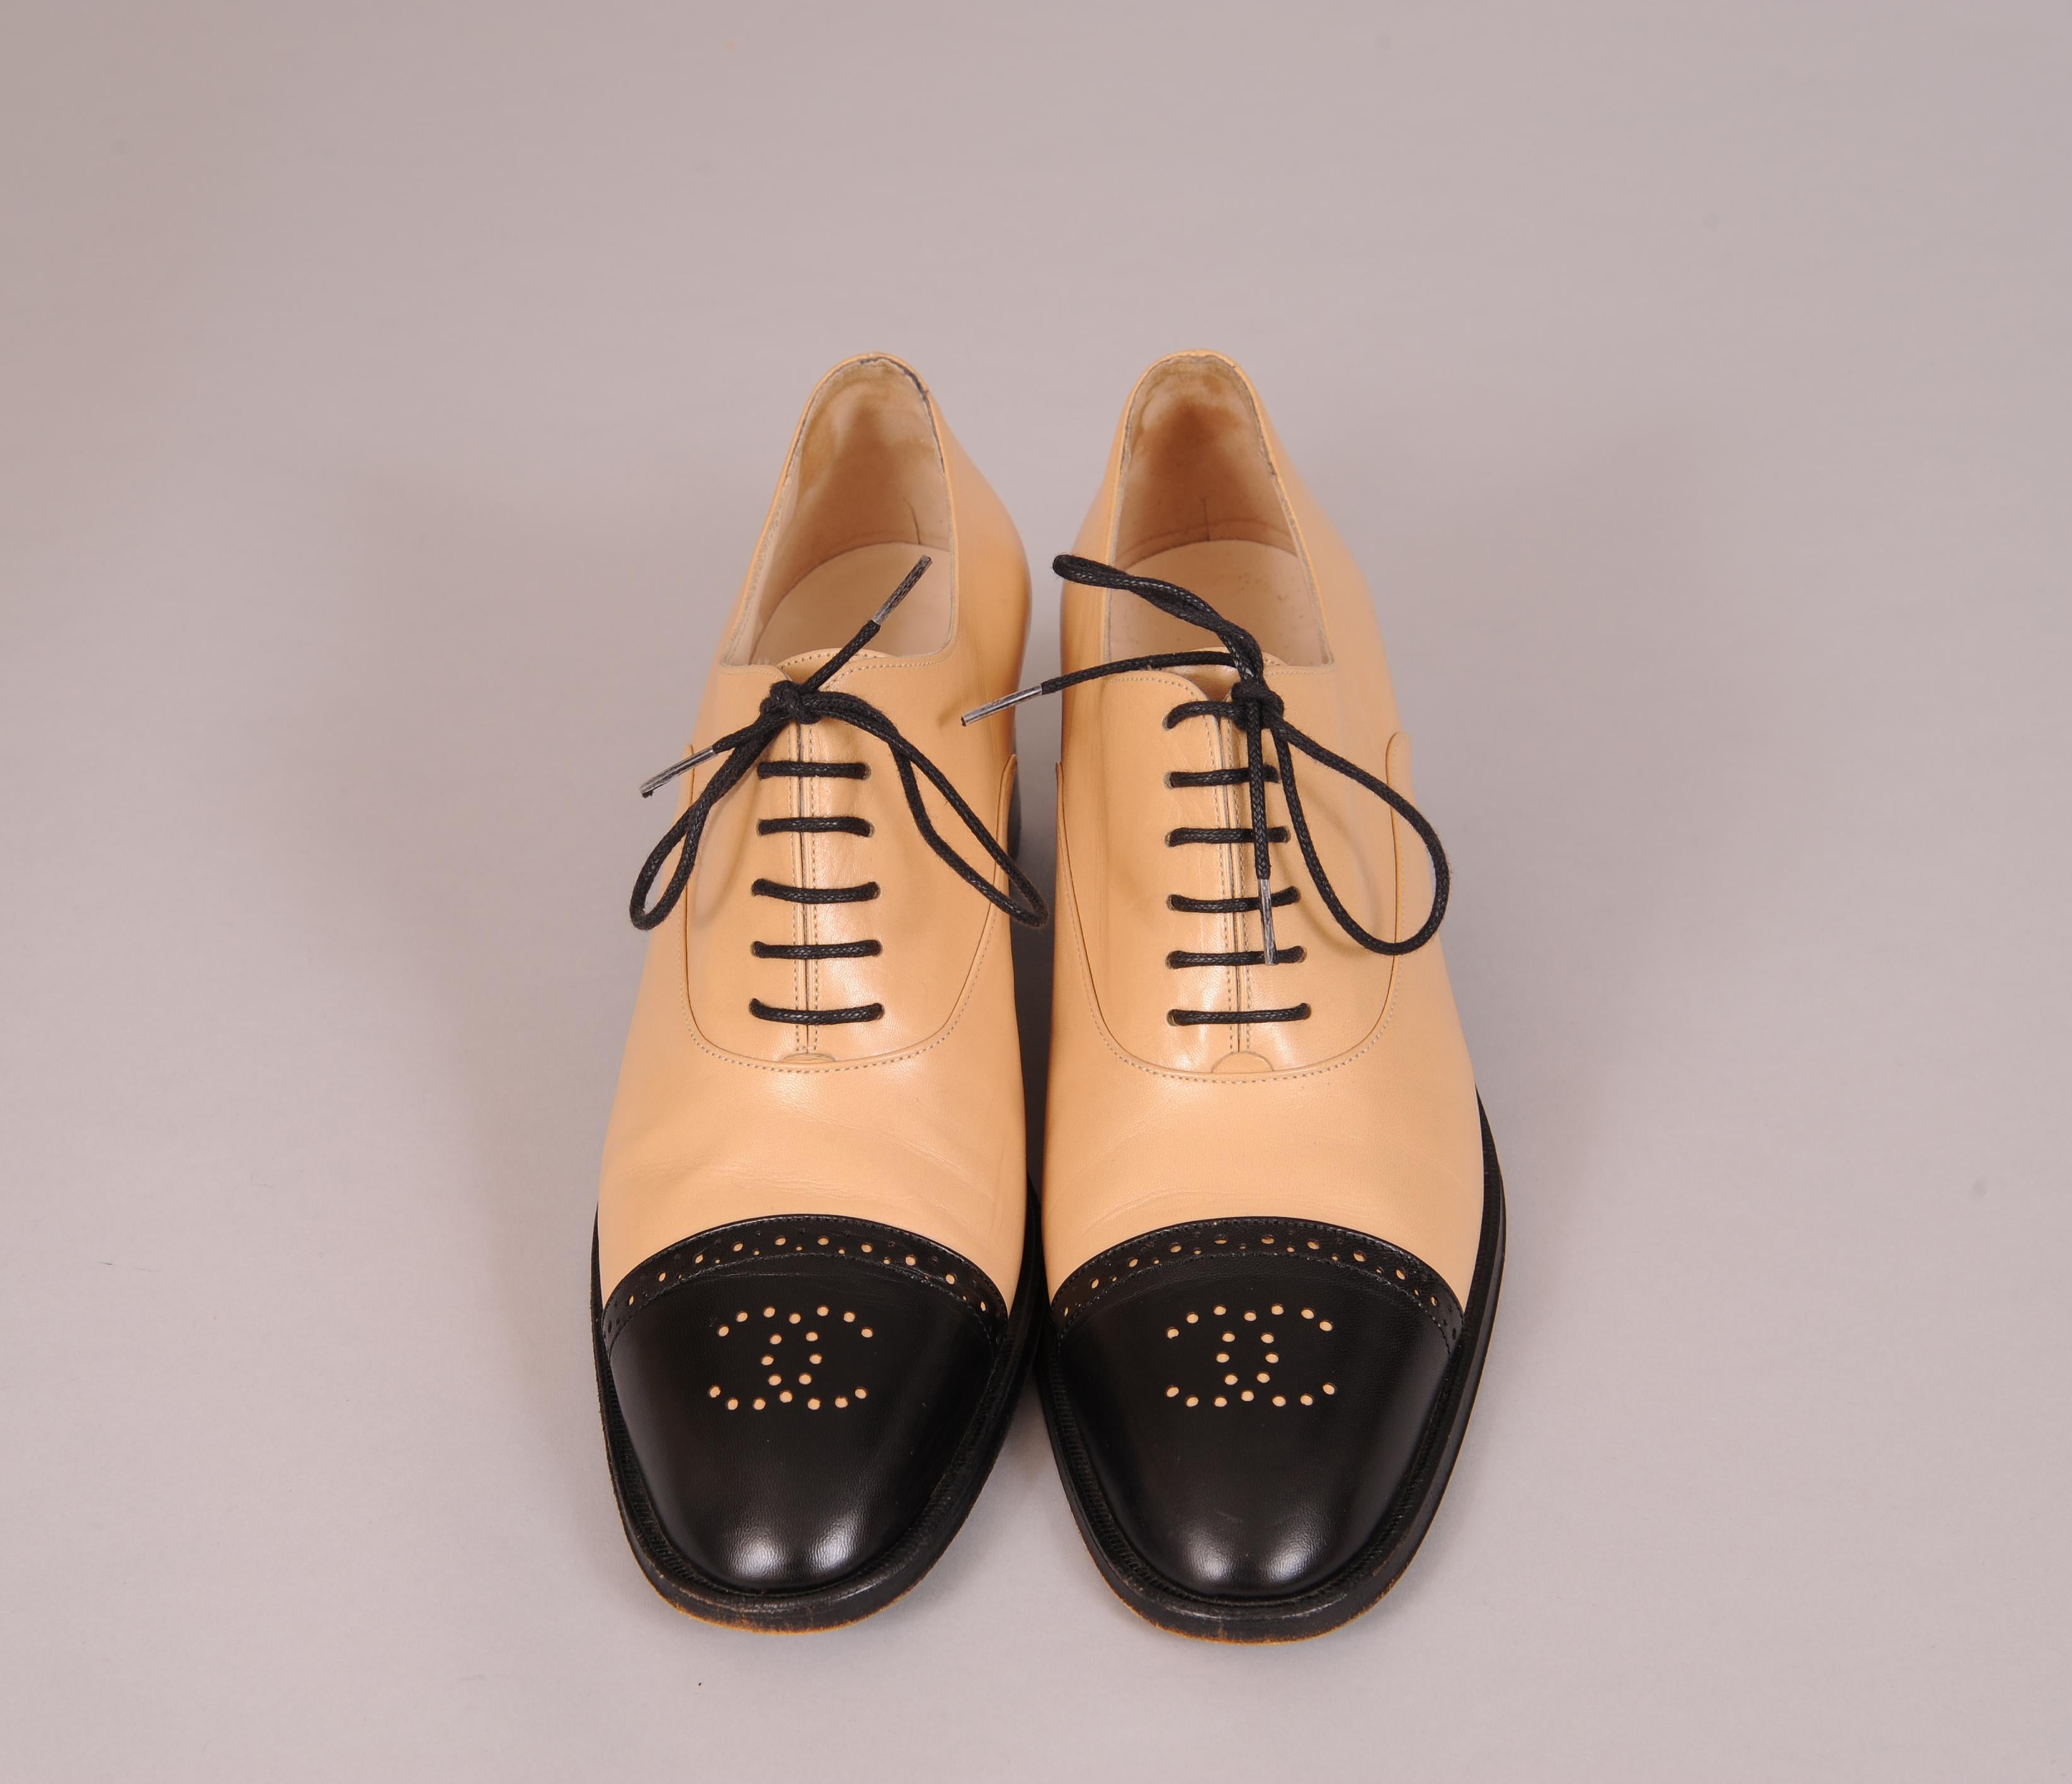 Tan leather oxfords are accented by black toe caps with the double C Chanel logo at the center. The shoes have black laces, heels and soles for added contrast. They appear to have been worn once or twice. The only wear is on the soles, the upper